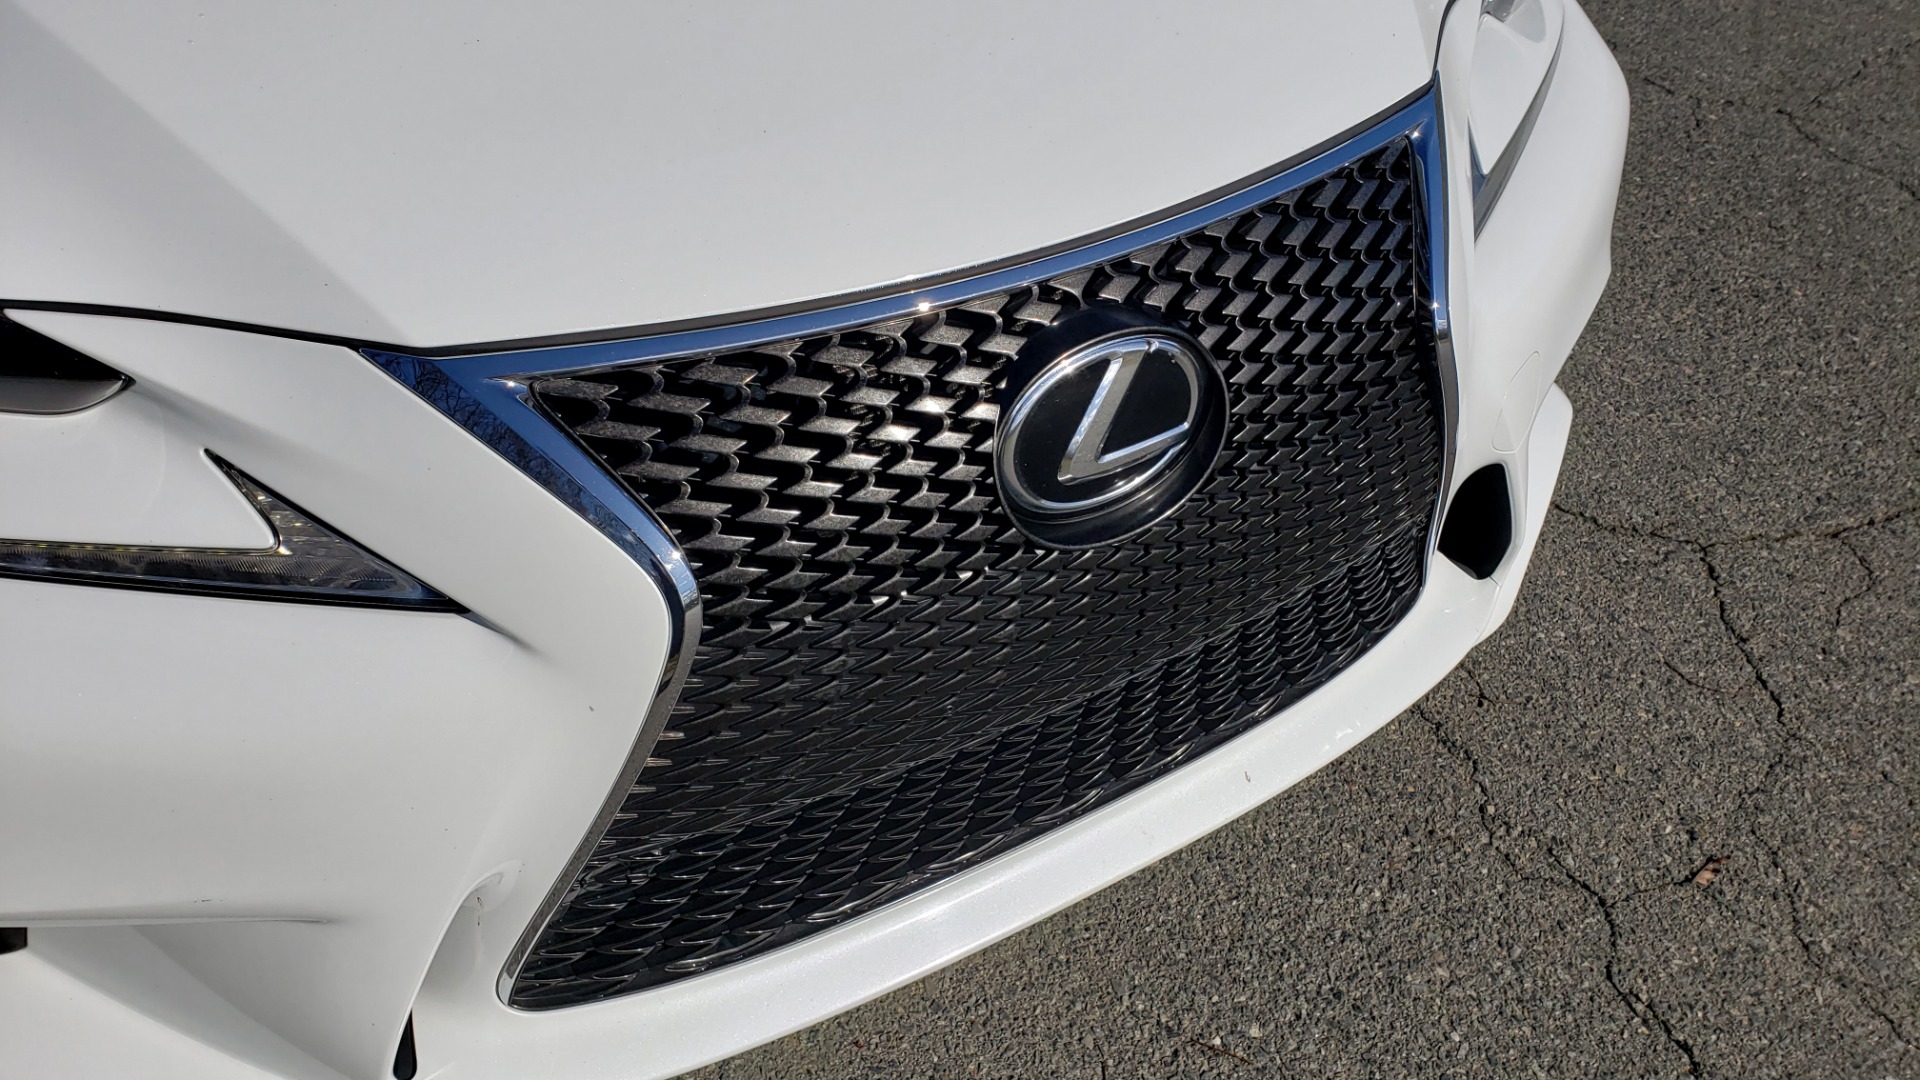 Used 2014 Lexus IS 250 F-SPORT / NAV / SUNROOF / REARVIEW / BSM for sale Sold at Formula Imports in Charlotte NC 28227 9